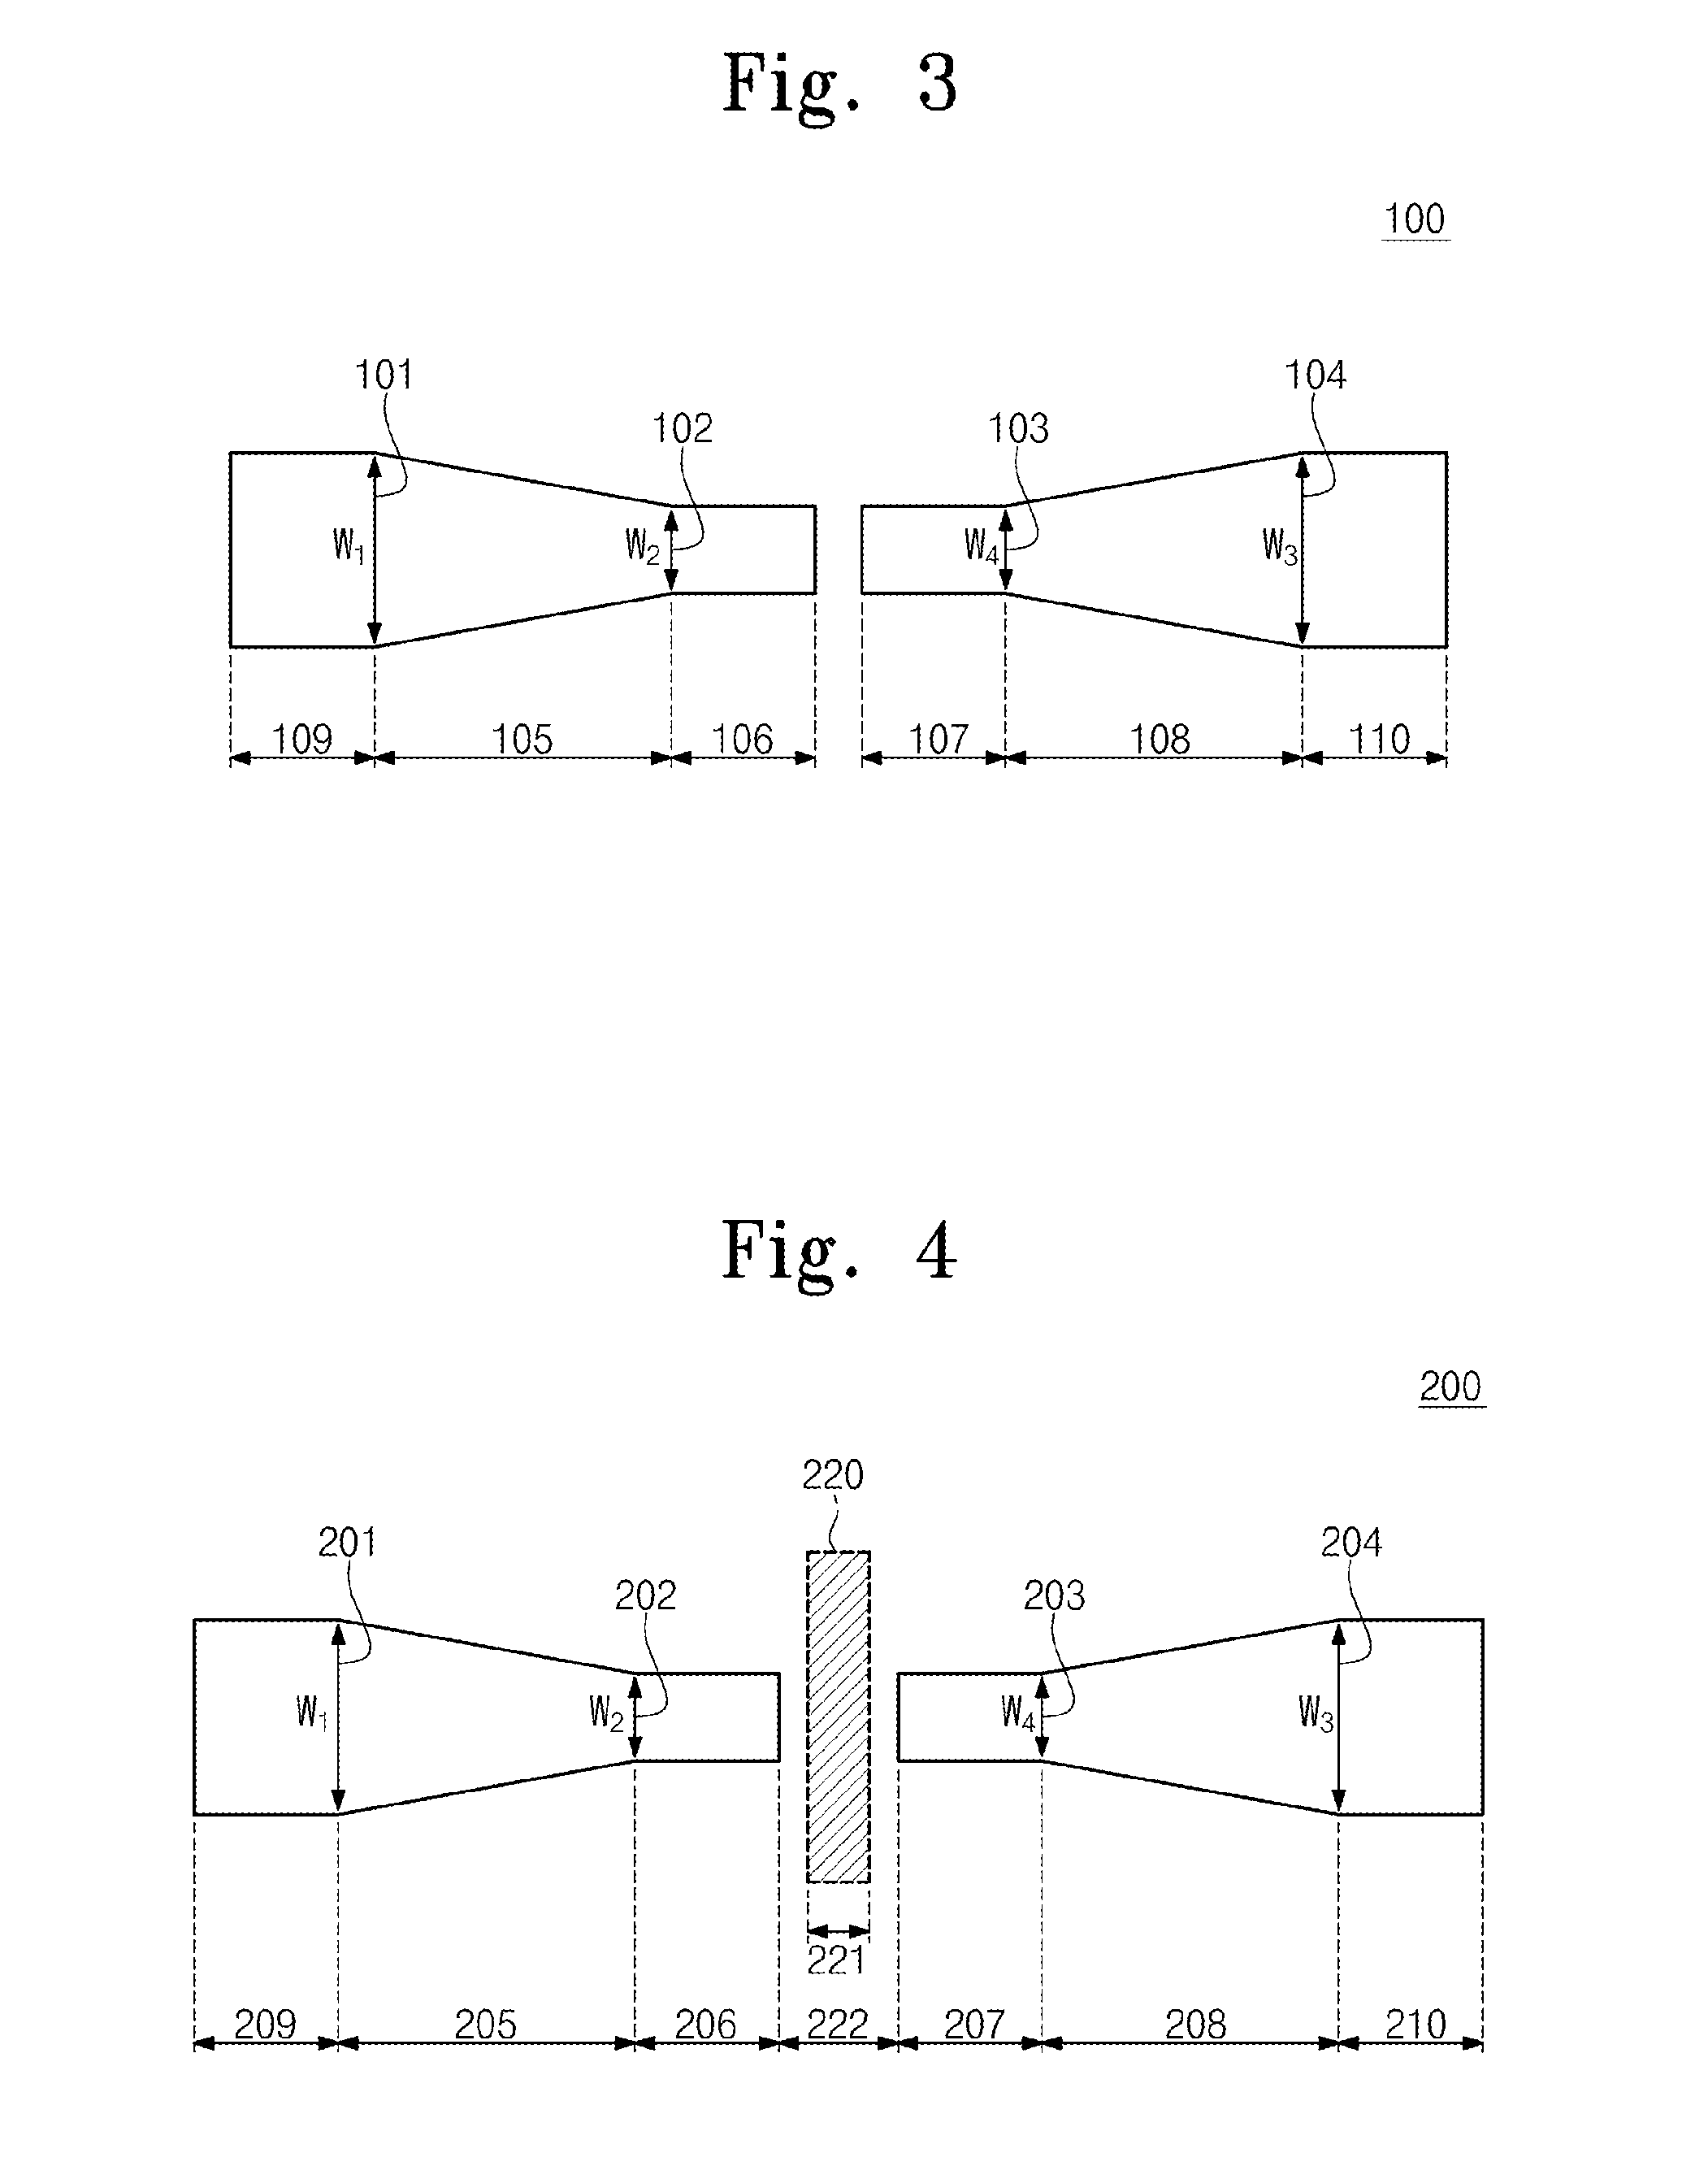 Core and optical waveguide